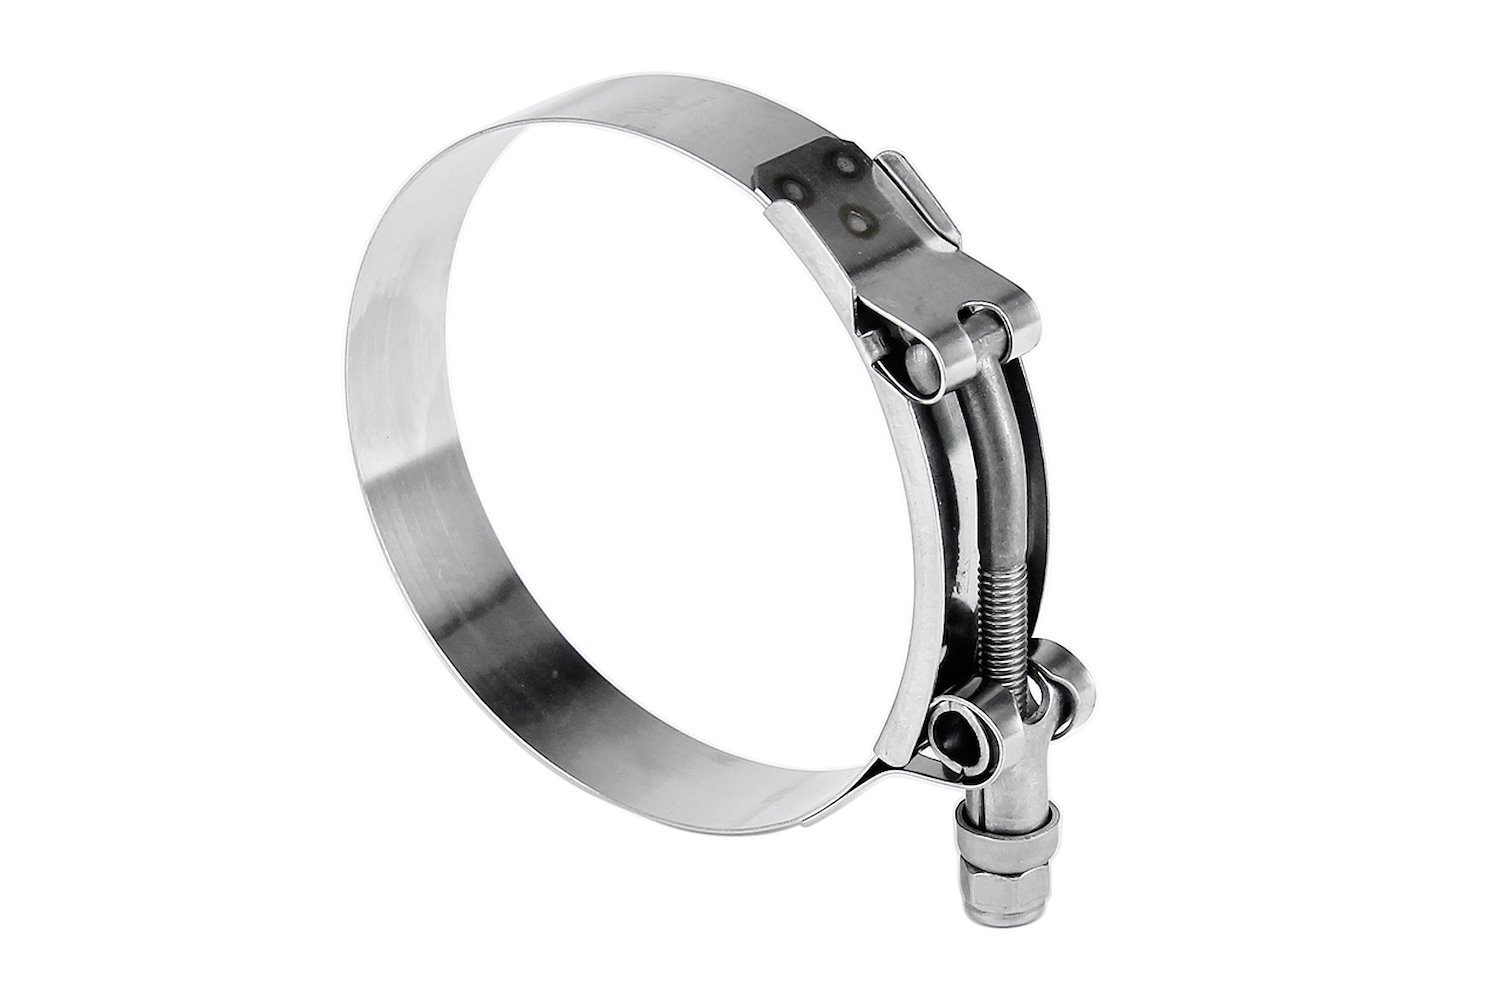 316-SSTC-44-51 100-Percent Marine Grade Stainless Steel T-Bolt Hose Clamp, Size #28, Range: 1.73 in.- 2 in.